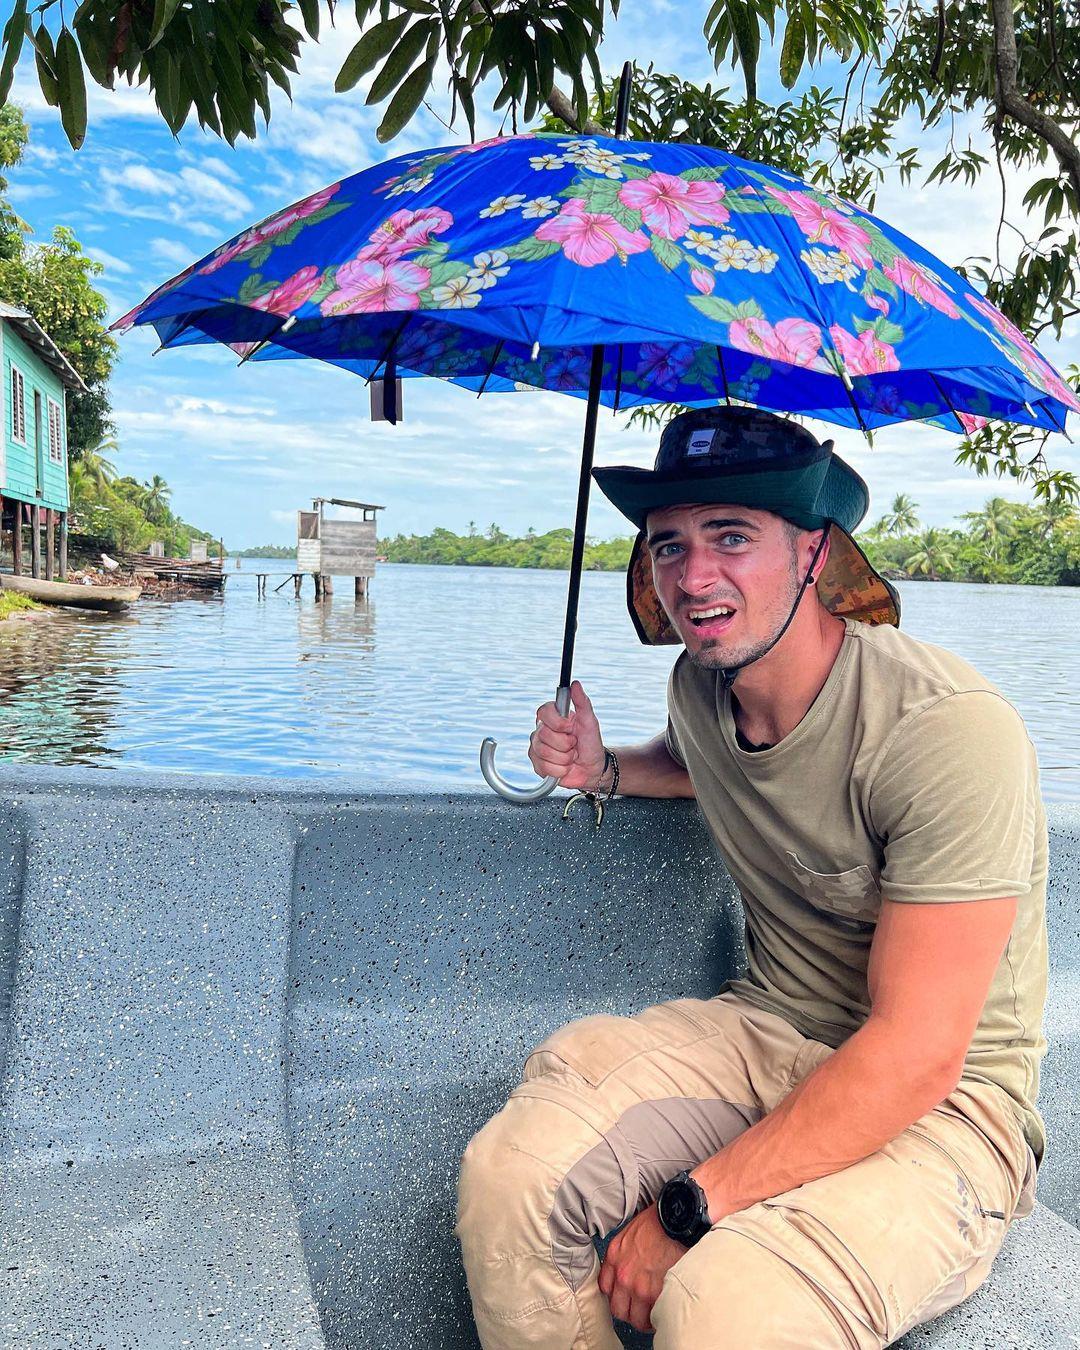 class="content__text"
 In the land of killer weather, drug drinks and feminine umbrellas. 

We’re coming to the last country of our Latin American travel series and it’s gonna be a blast! New episode tomorrow 🔥

 #ExpeditionUnexpected #LatinAmerica #tomorrow 
 